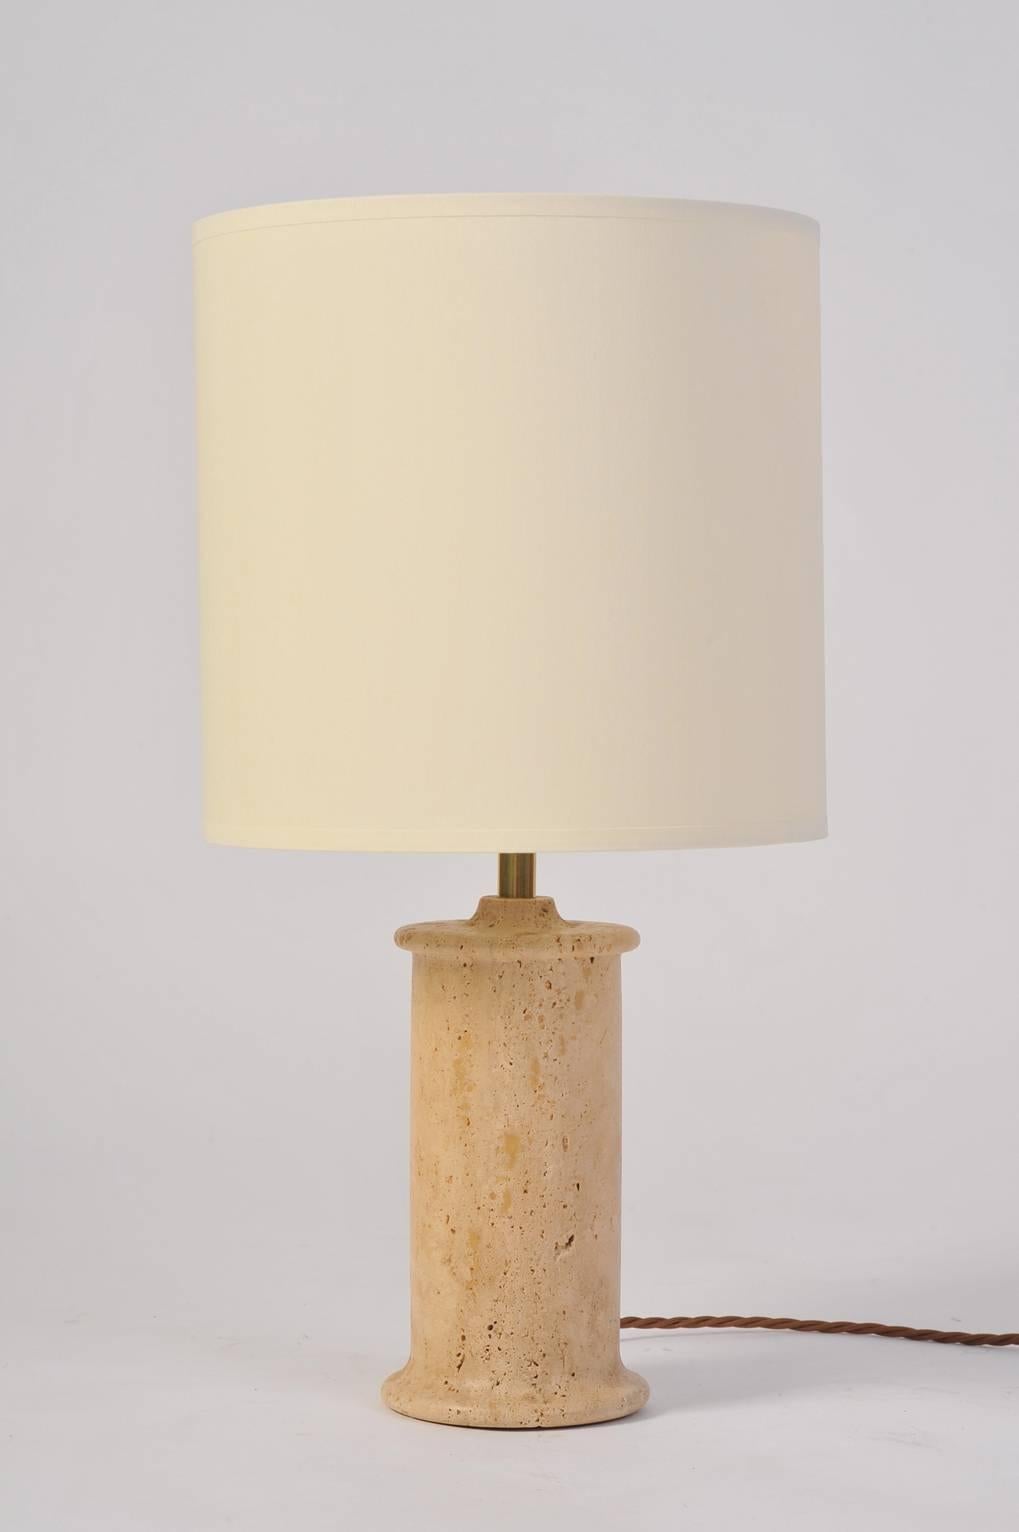 A carved honed travertine table lamp, with a bespoke ivory fabric drum shade.
Italy, circa 1970.